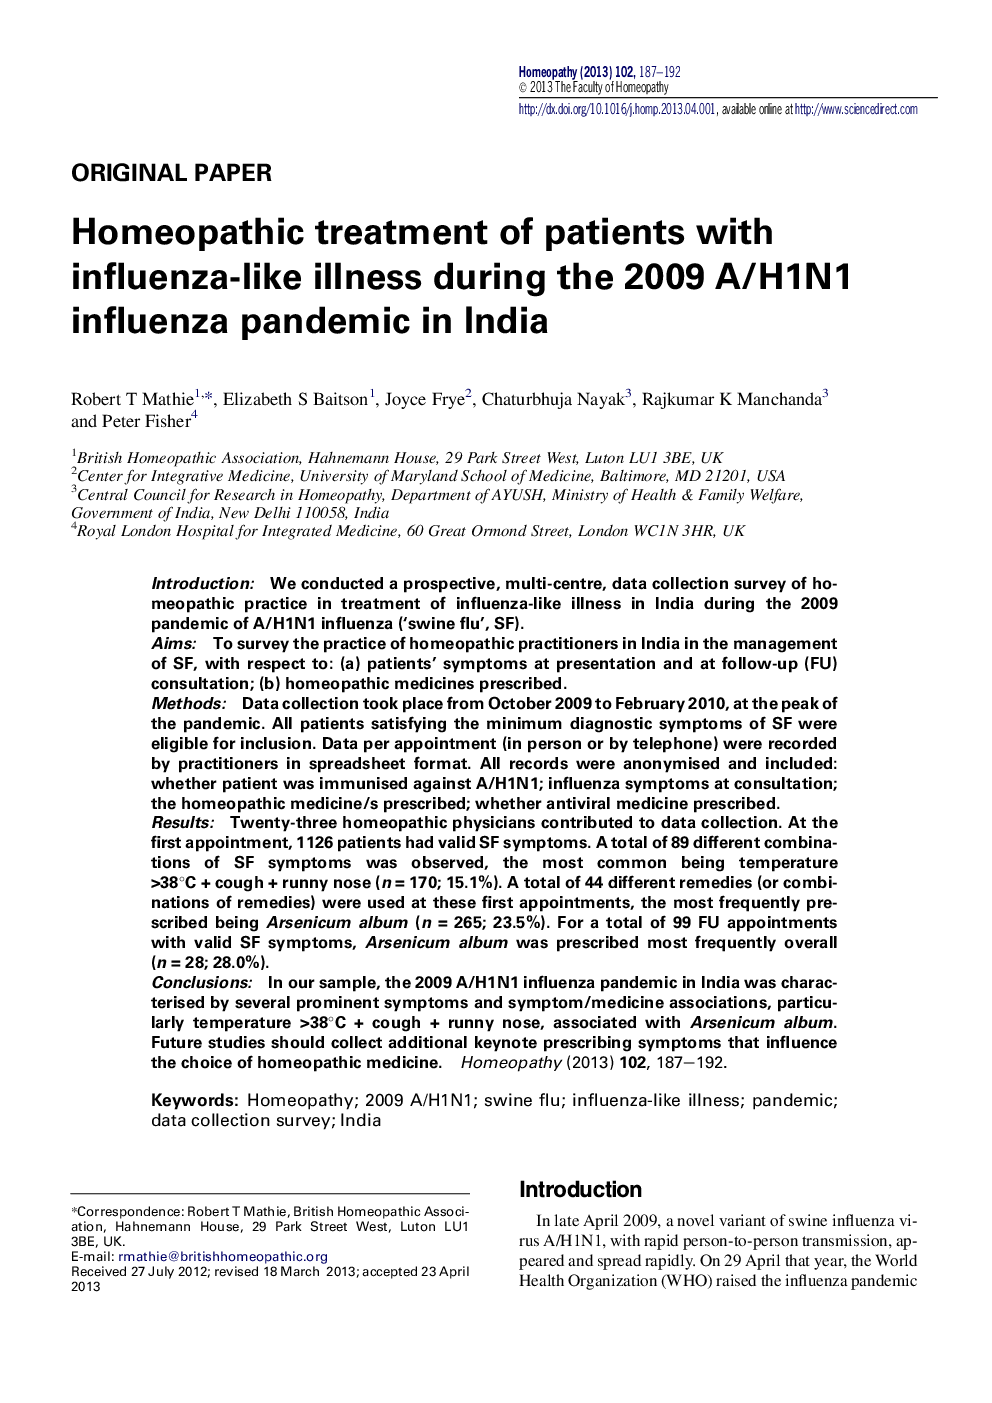 Homeopathic treatment of patients with influenza-like illness during the 2009 A/H1N1 influenza pandemic in India